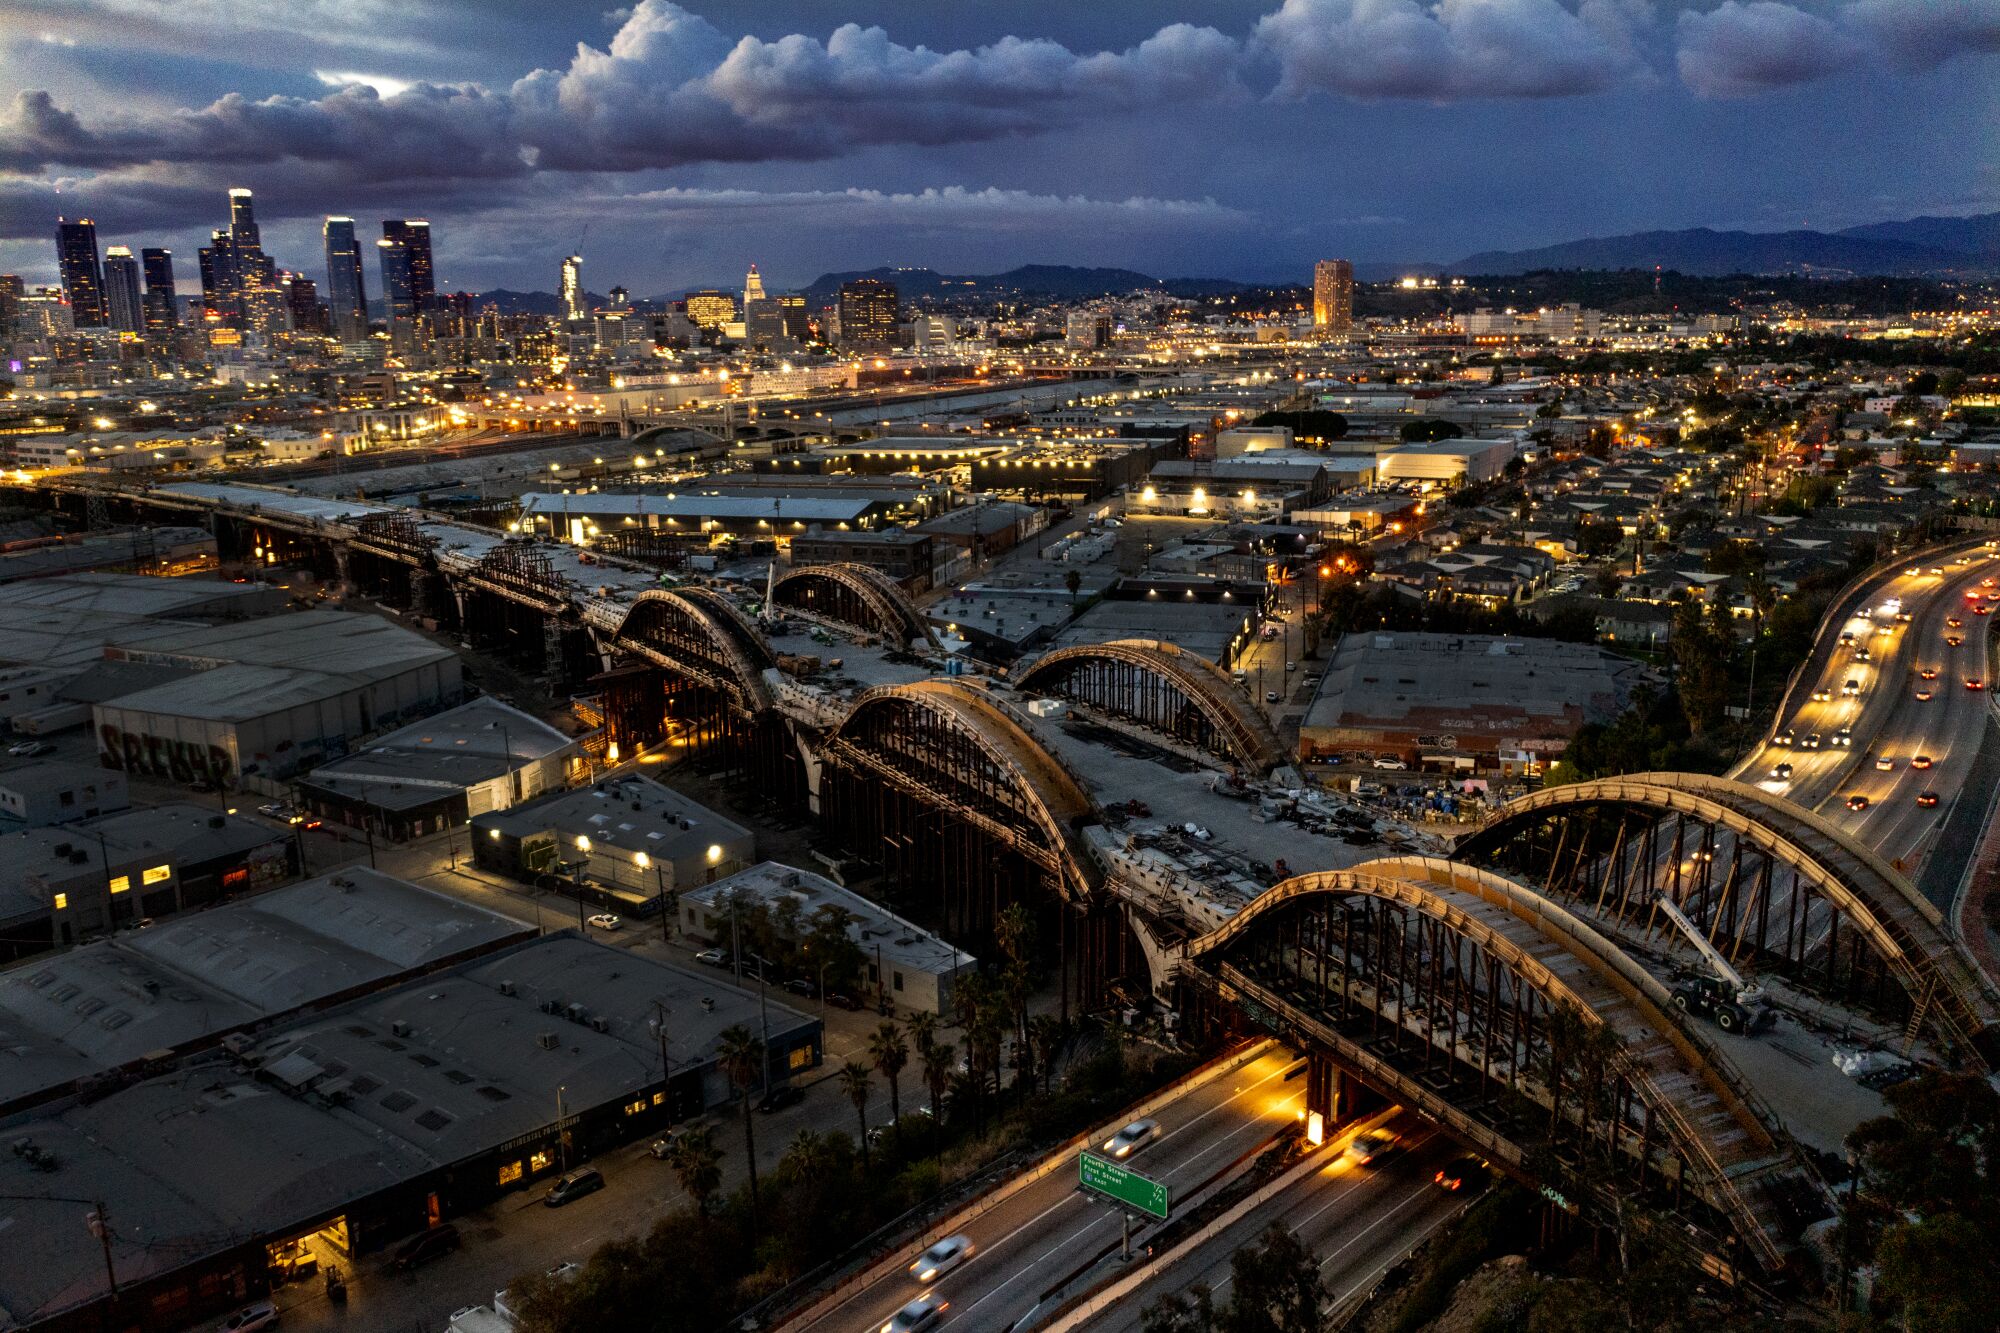 March 11: Work continues on the 6th Street Viaduct against a backdrop of the downtown L.A. skyline after sunset.